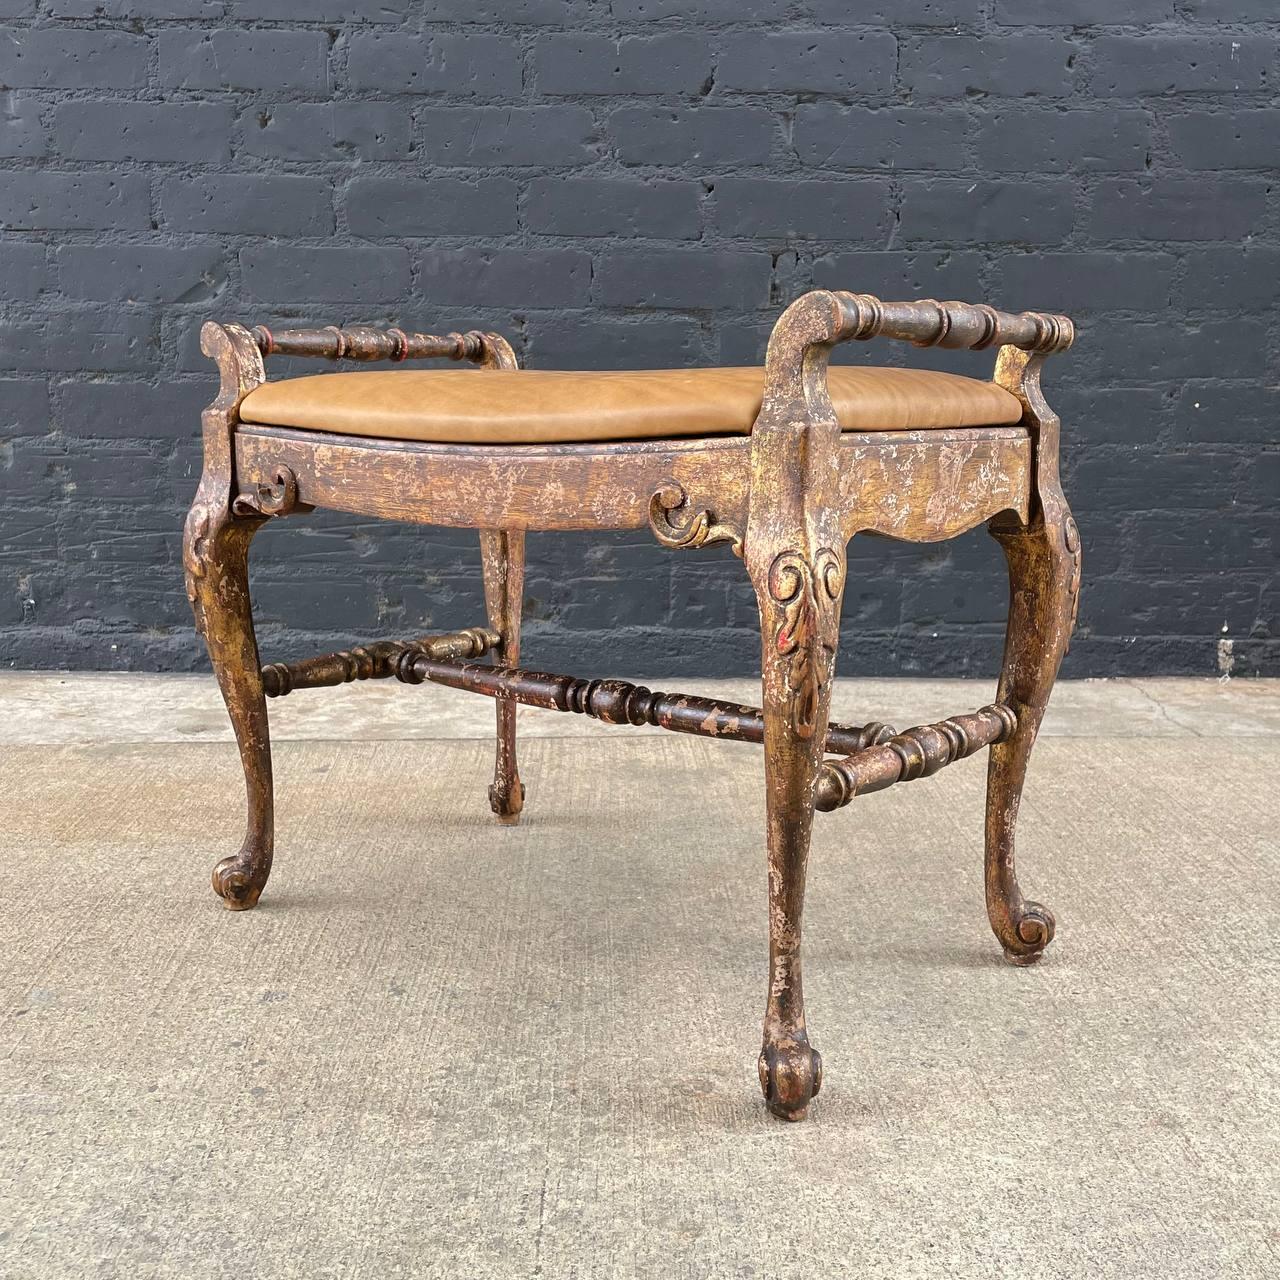 English Style Gilt Wood & Leather Bench with Cabriole Legs In Good Condition For Sale In Los Angeles, CA